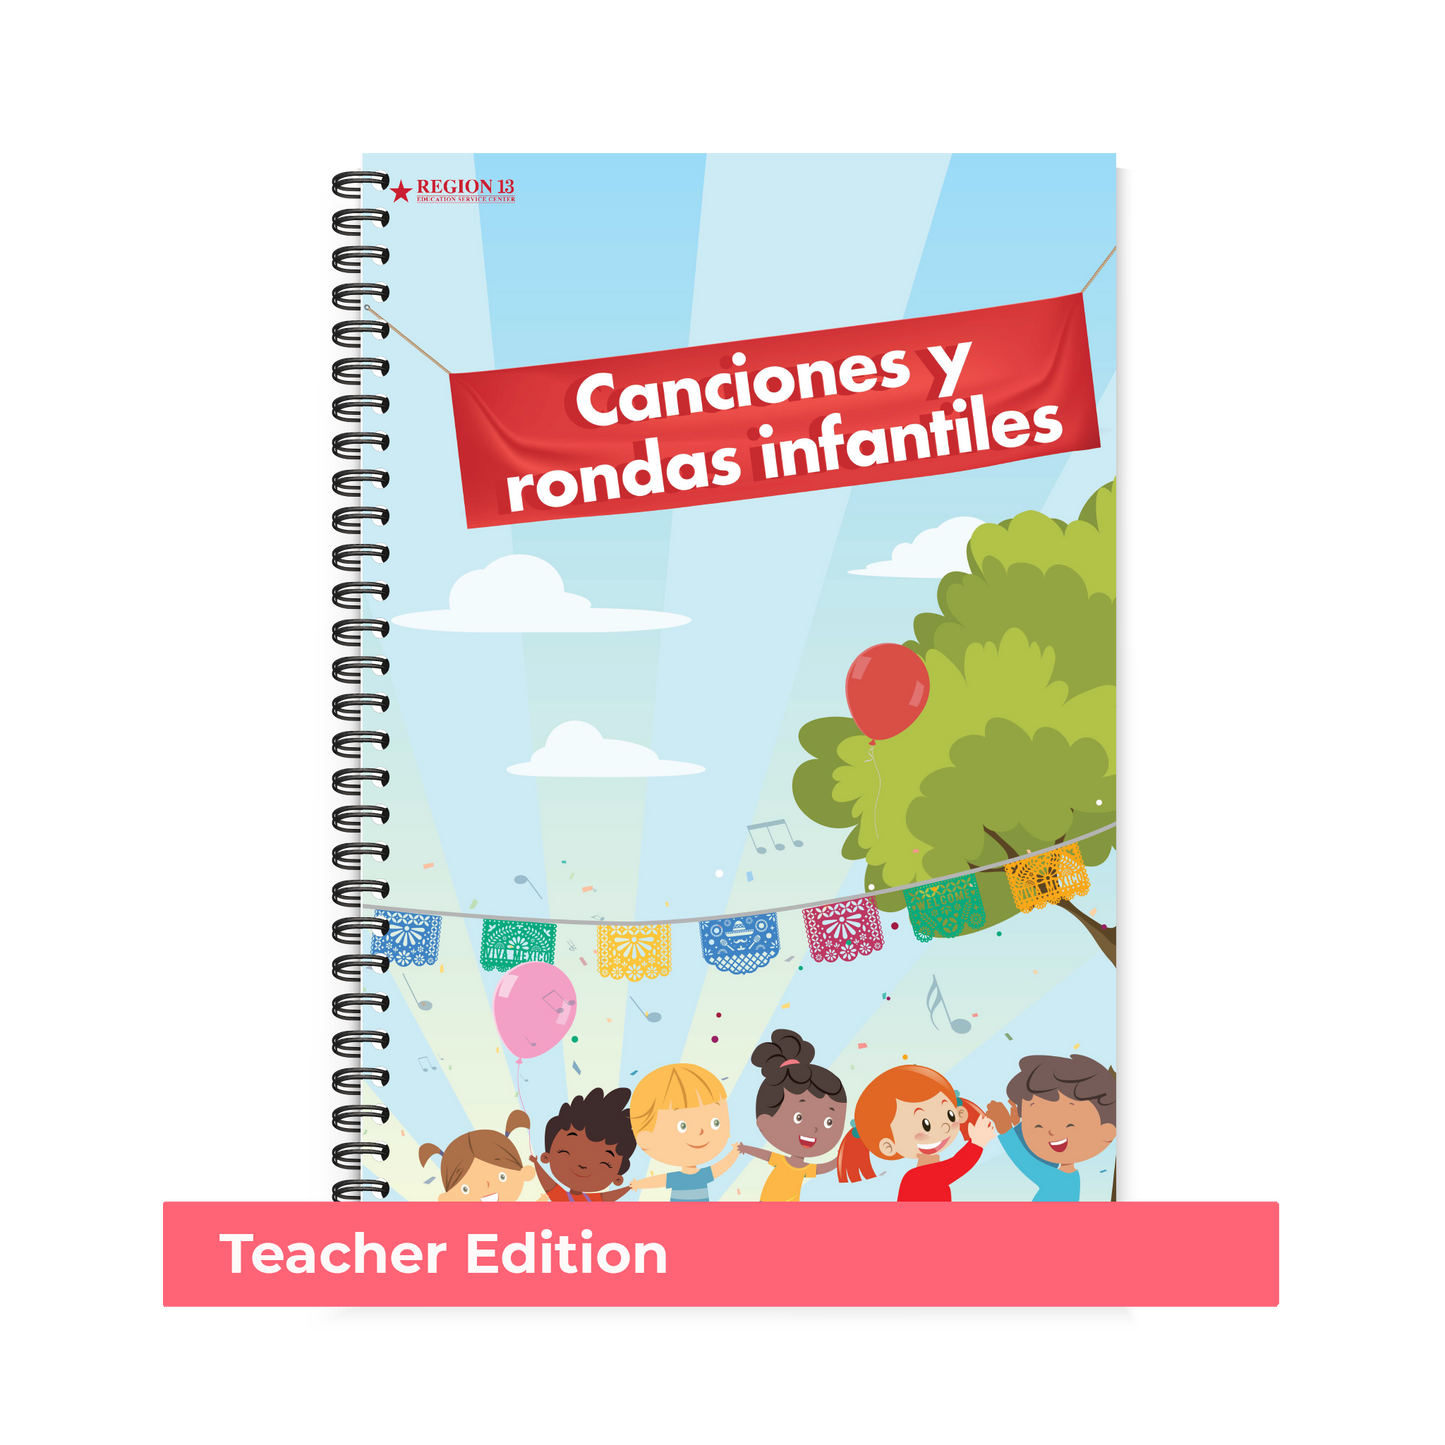 Preview of the blue illustrated cover featuring clouds, a tree, music notes, confetti, papel picado, balloons, and six children holding hands and smiling on the front of Region 13's Canciones y rondas infantiles - Teacher Version.